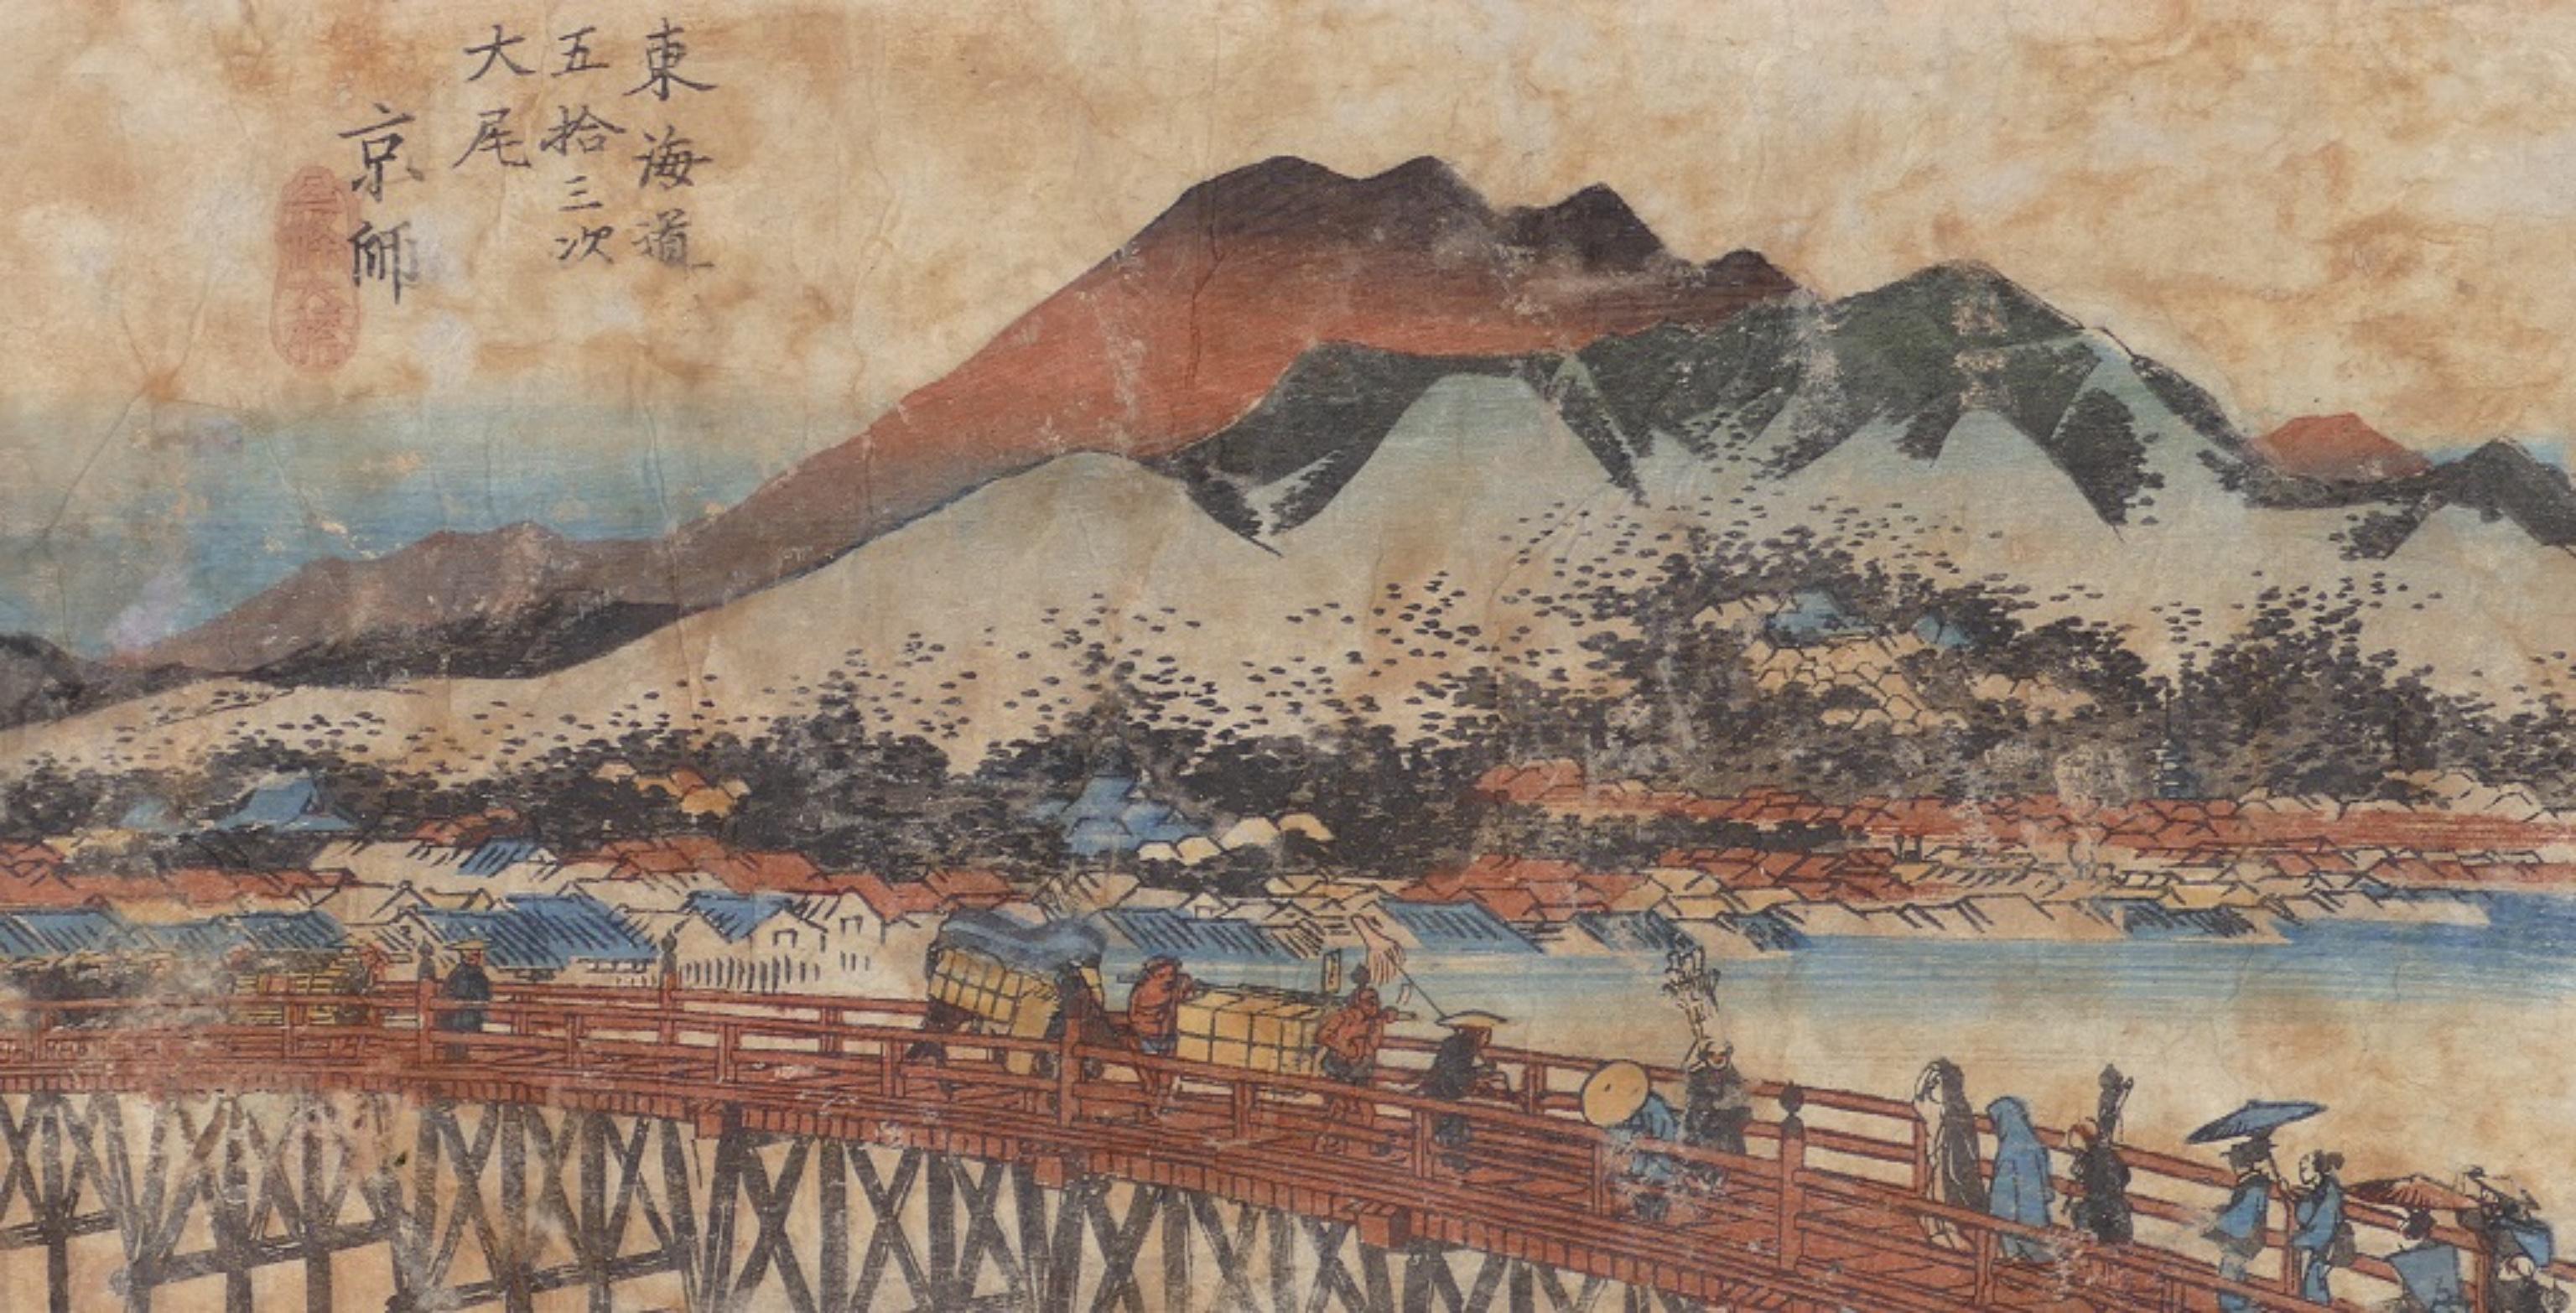 Keishi (Kyoto) is a beautiful color woodblock print on paper, a plate depicting a view of the Japanese capital, from the series  Fifty-three Stations Along  the Tokaido, published by Tsutaya Kichizo around 1855. 

This plate, as well all the plates